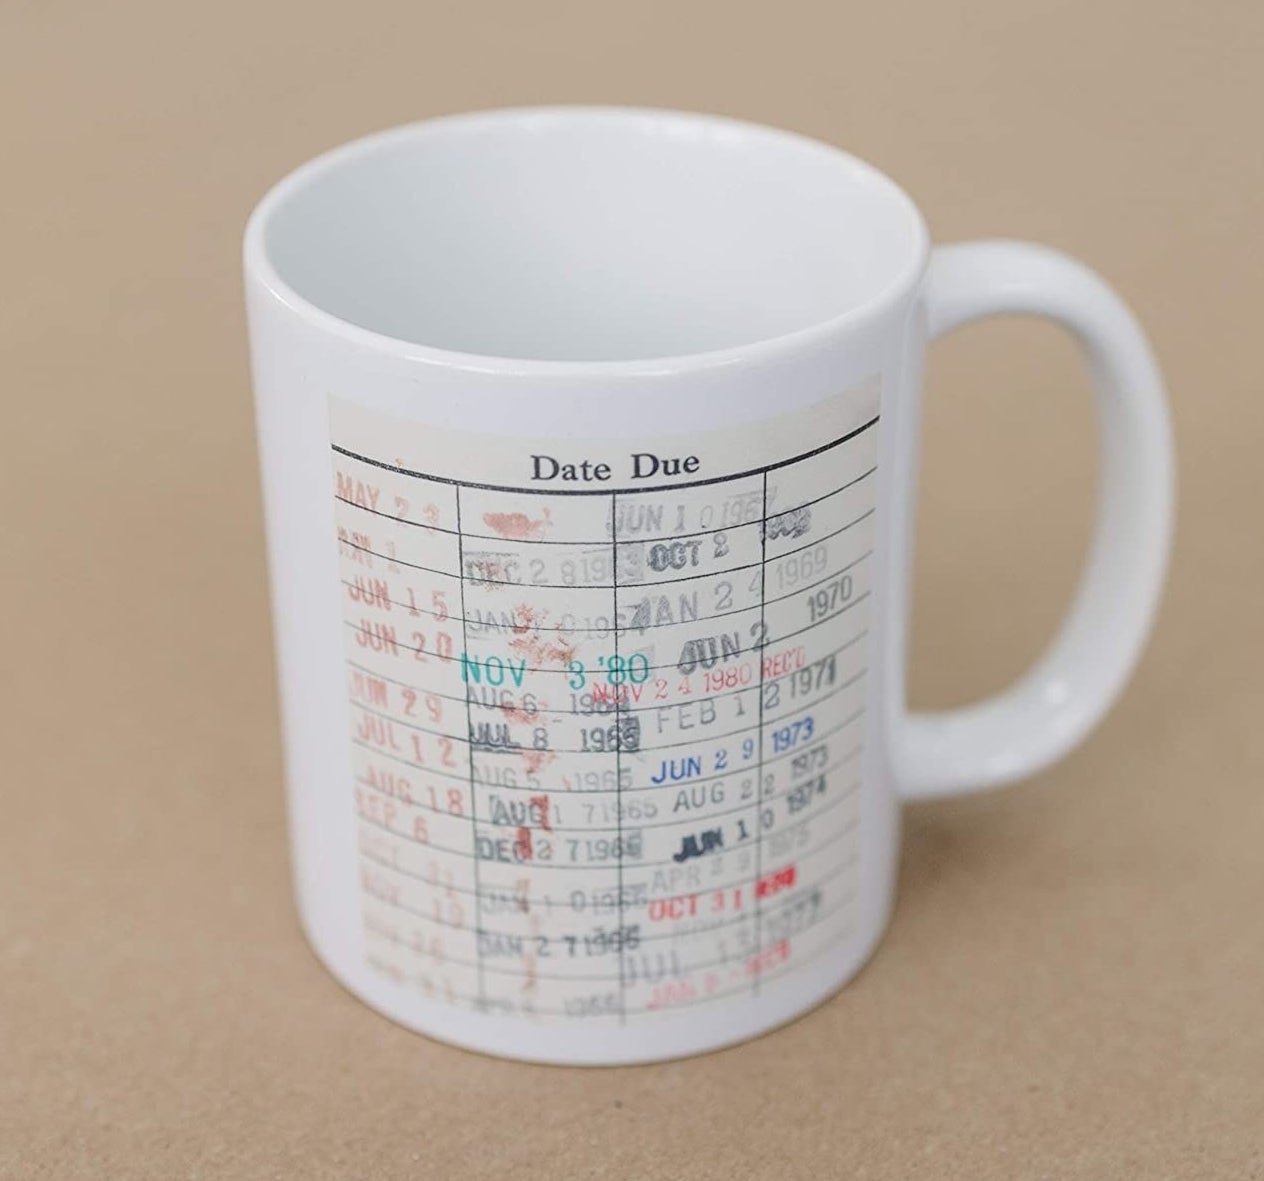 The library due date mug